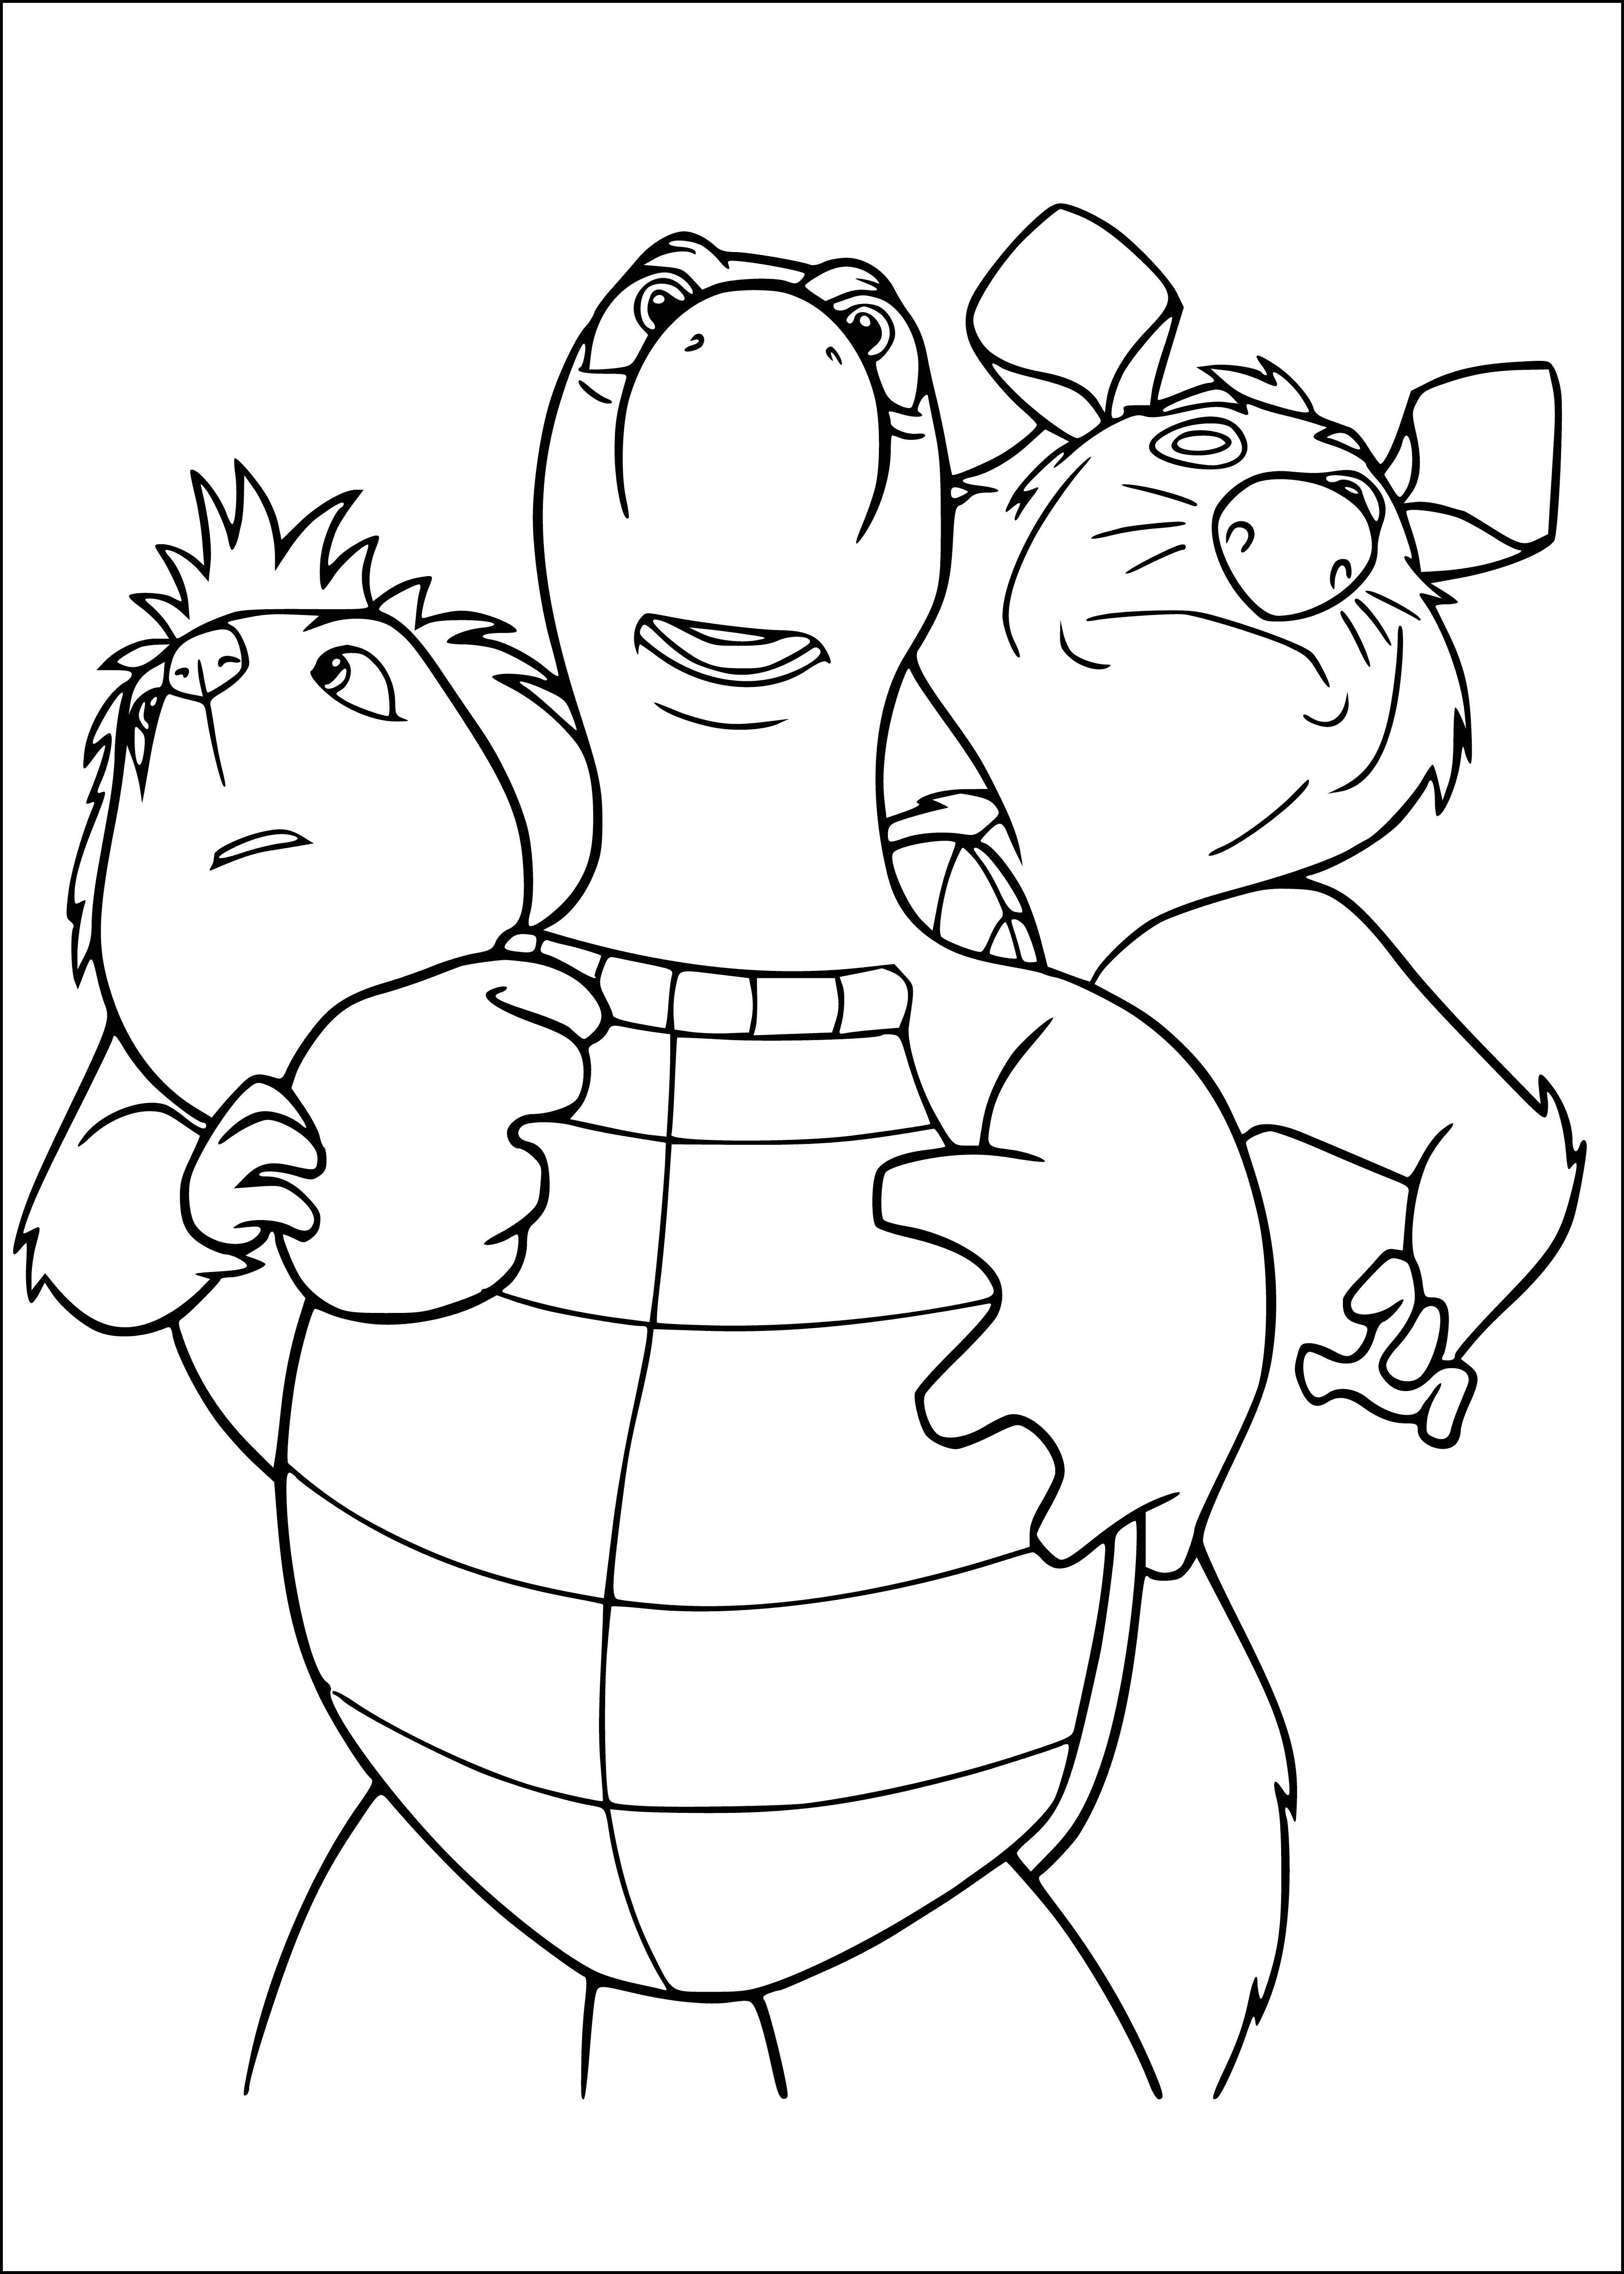 Turtles and Opposum coloring page